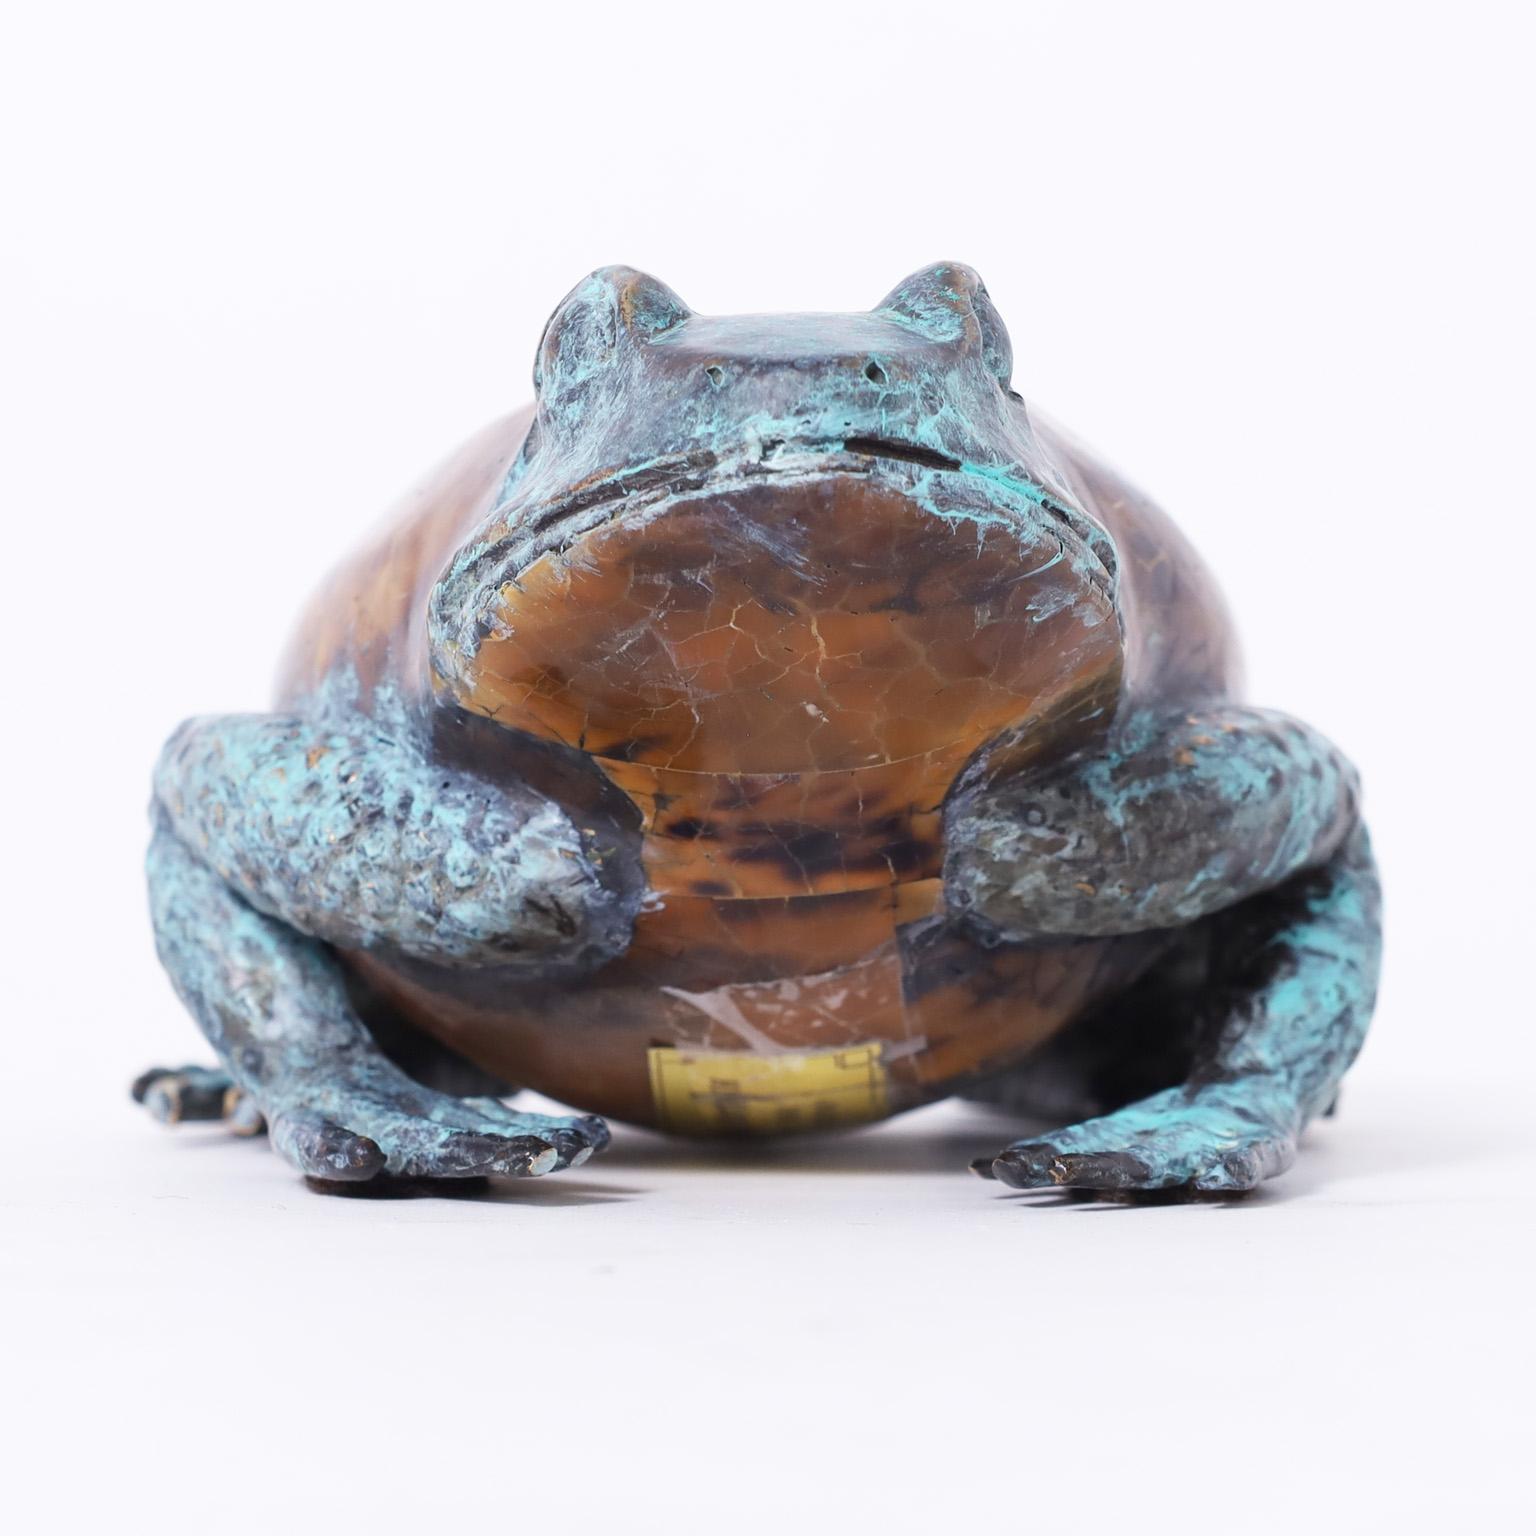 Mid century life size frog crafted in cast bronze with a lush verdigris finish and featuring a tortoise shell body. Signed Maitland-Smith on the bottom.